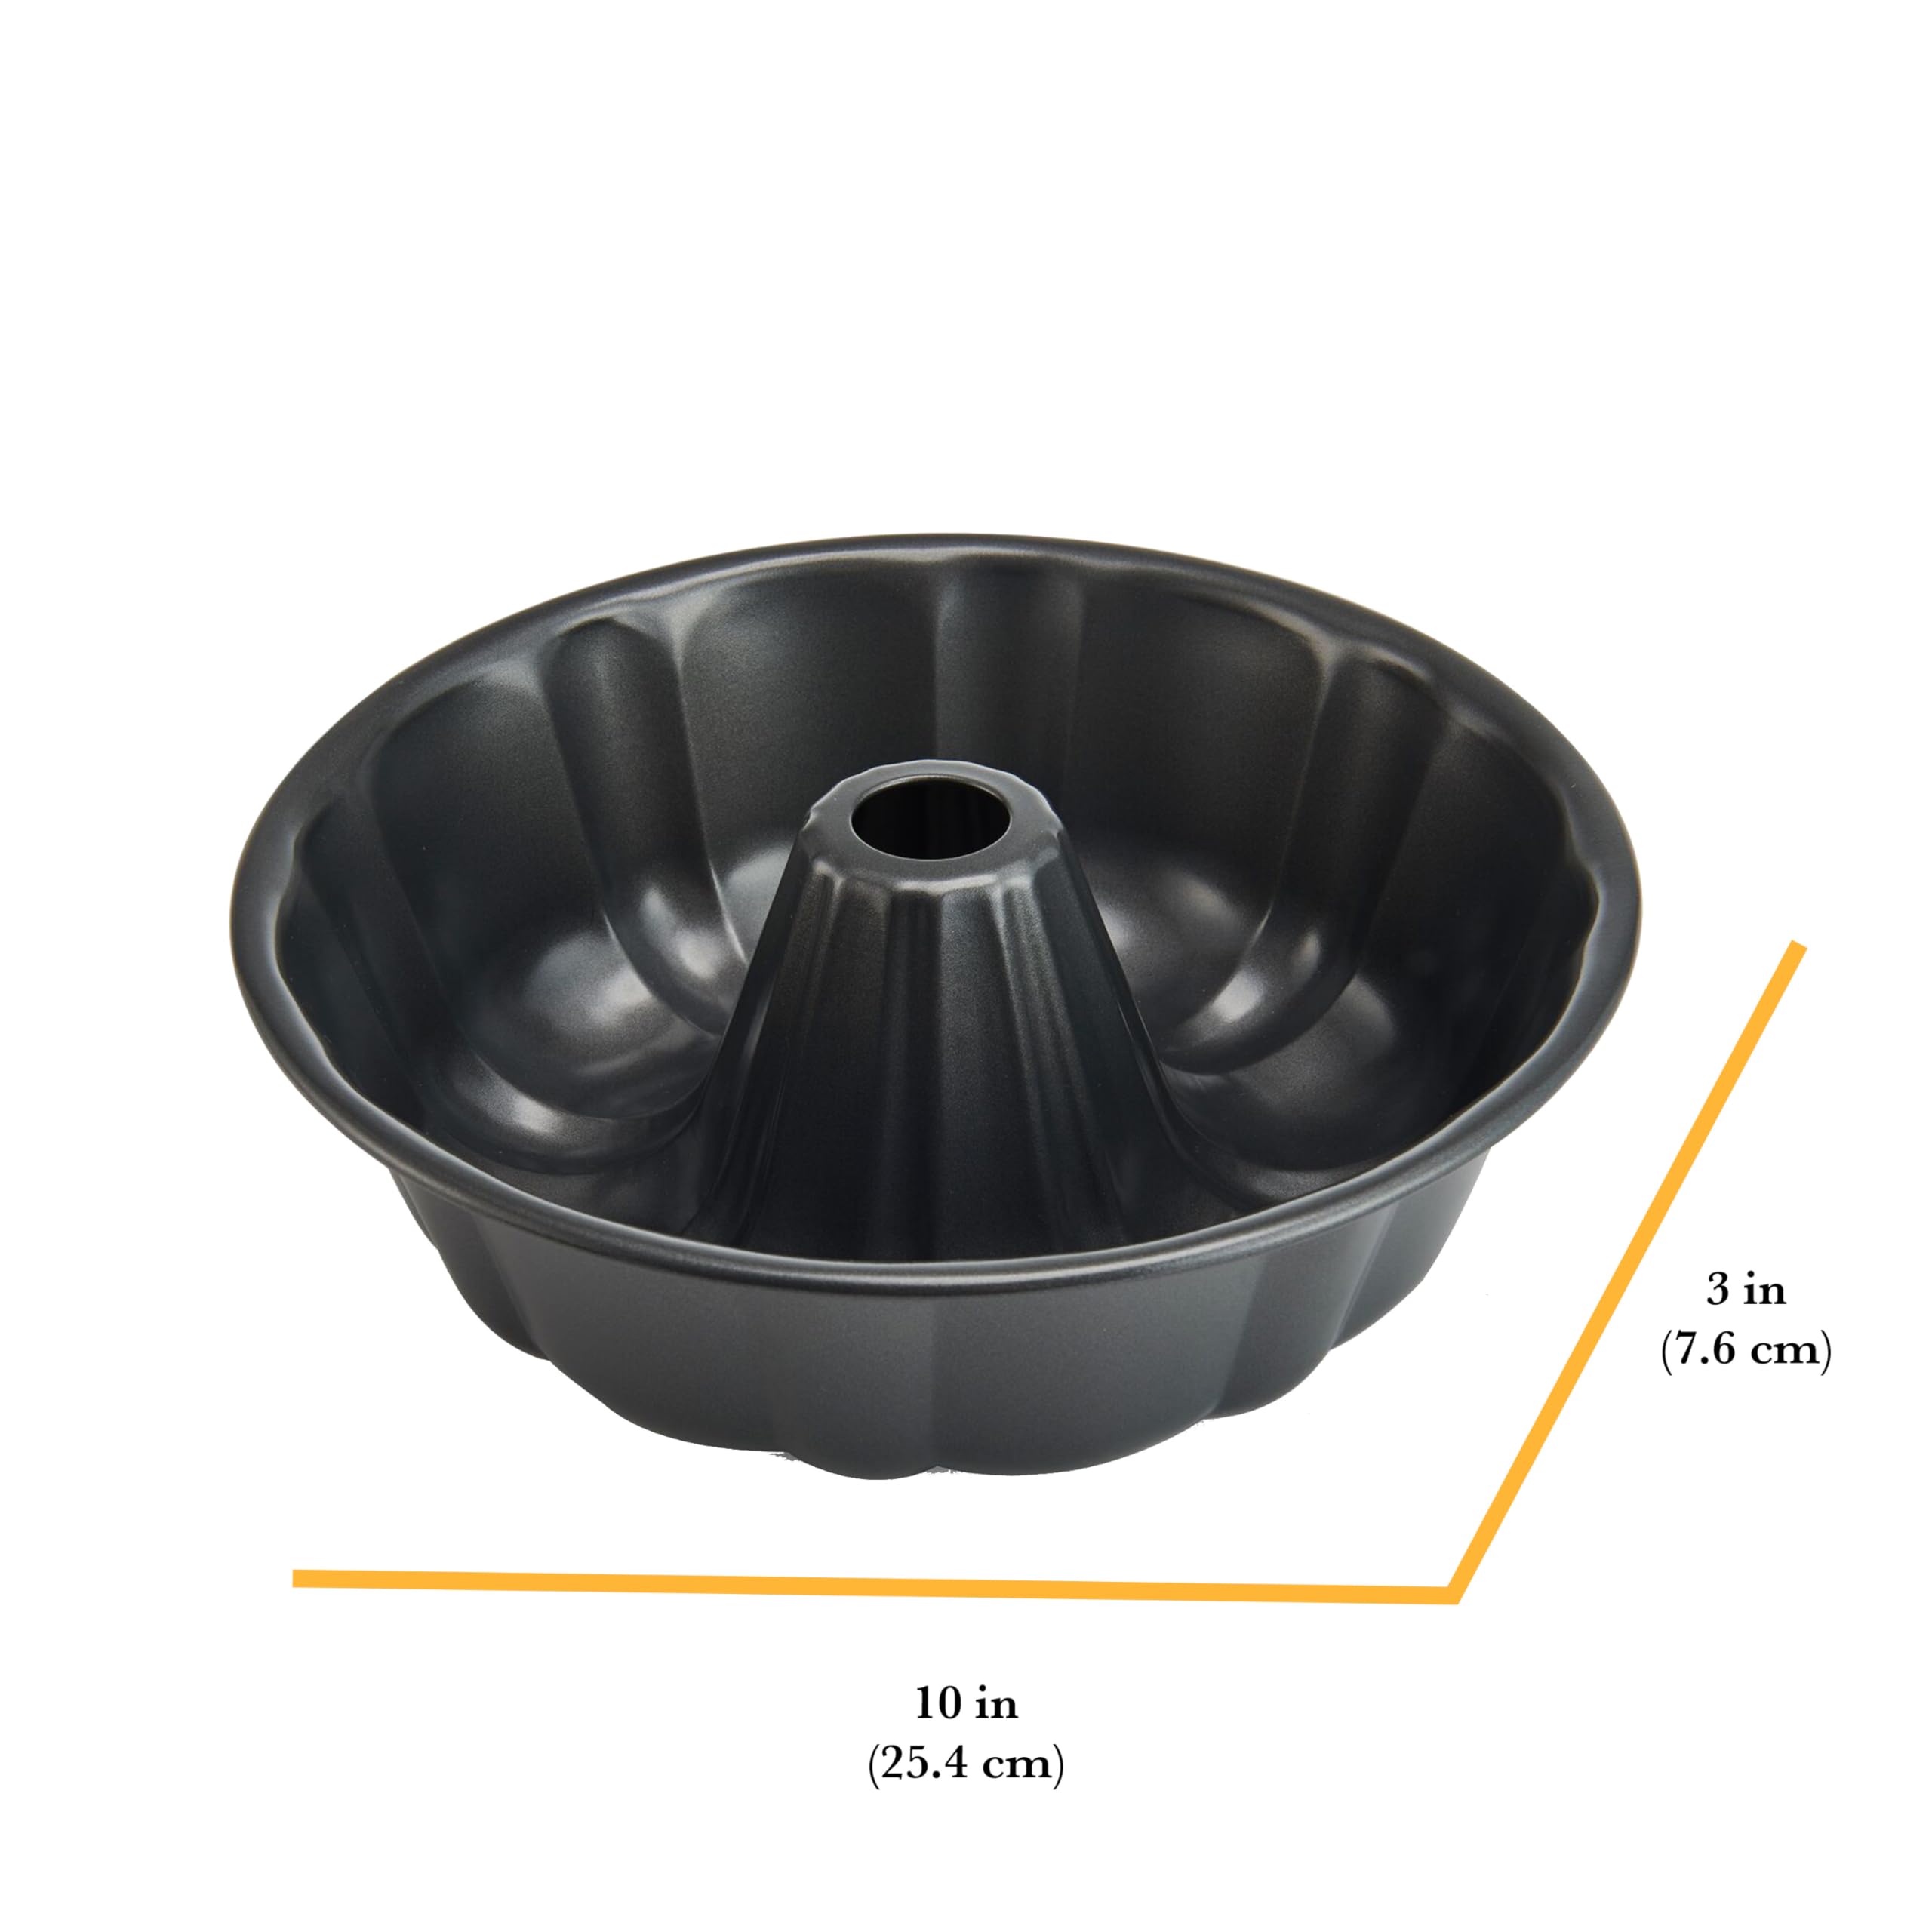 Chicago Metallic Nonstick Fluted Cake Pan, Perfect for Bundt cakes, monkey breads, casseroles, lasagnas, and more! 10-Inch, Gray